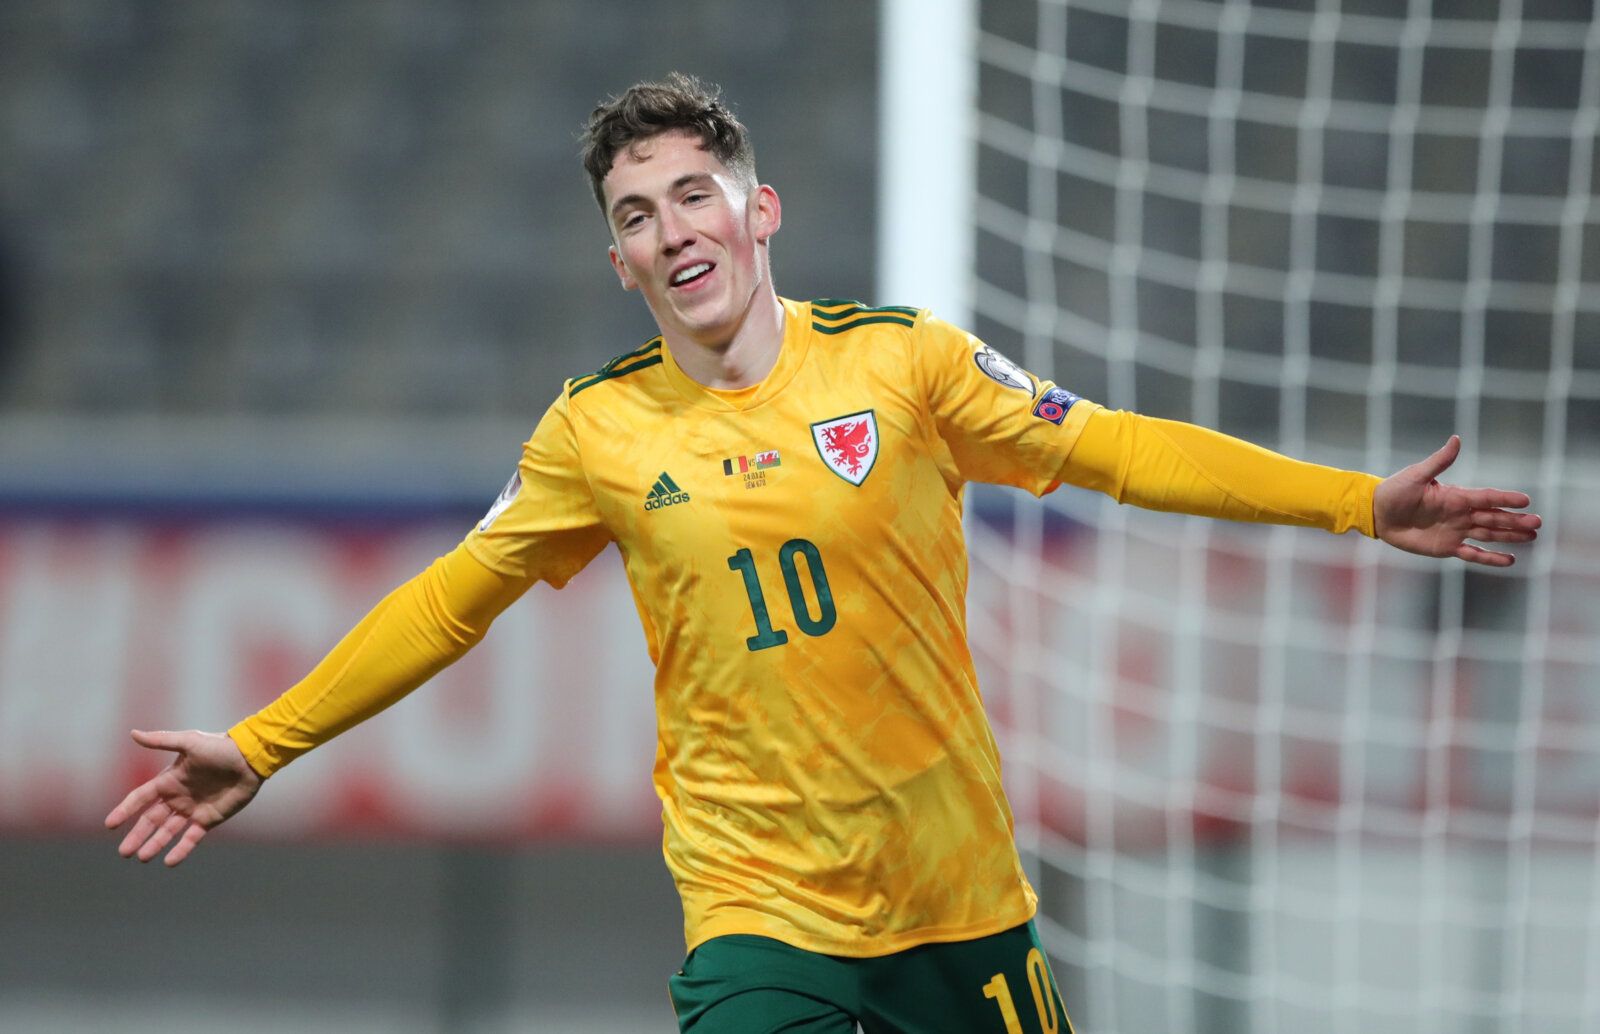 Soccer Football - World Cup Qualifiers Europe - Group E - Belgium v Wales - Den Dreef, Leuven, Belgium - March 24, 2021 Wales' Harry Wilson celebrates scoring their first goal REUTERS/Pascal Rossignol